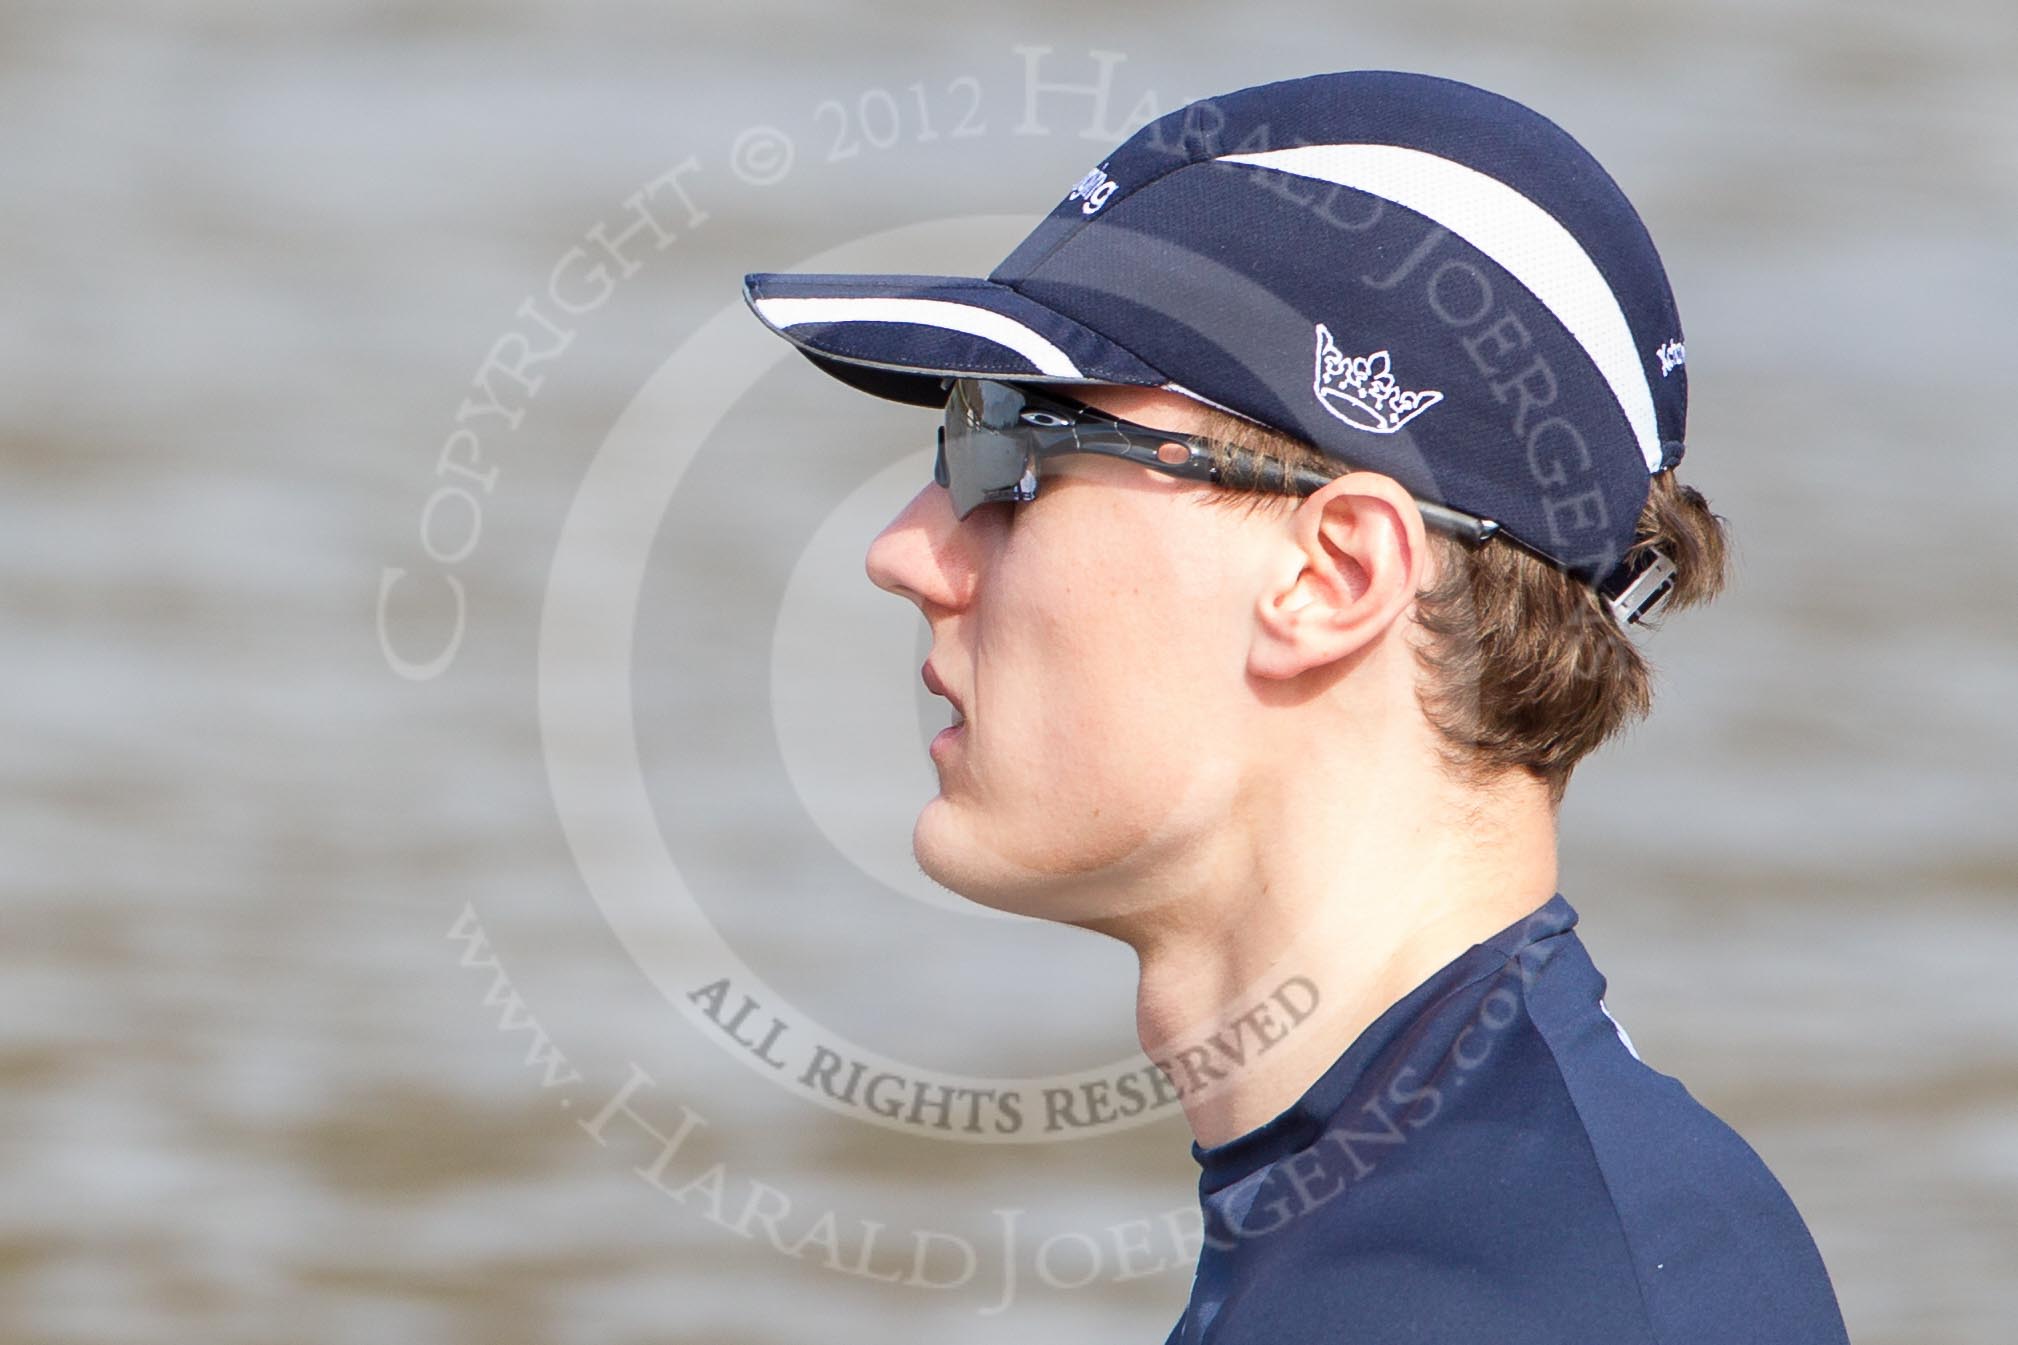 The Boat Race season 2012 - fixture CUBC vs Leander: Close-up of OUBC 5 seat Karl Hudspith..
River Thames between Putney and Molesey,
London,
Greater London,
United Kingdom,
on 10 March 2012 at 13:05, image #10